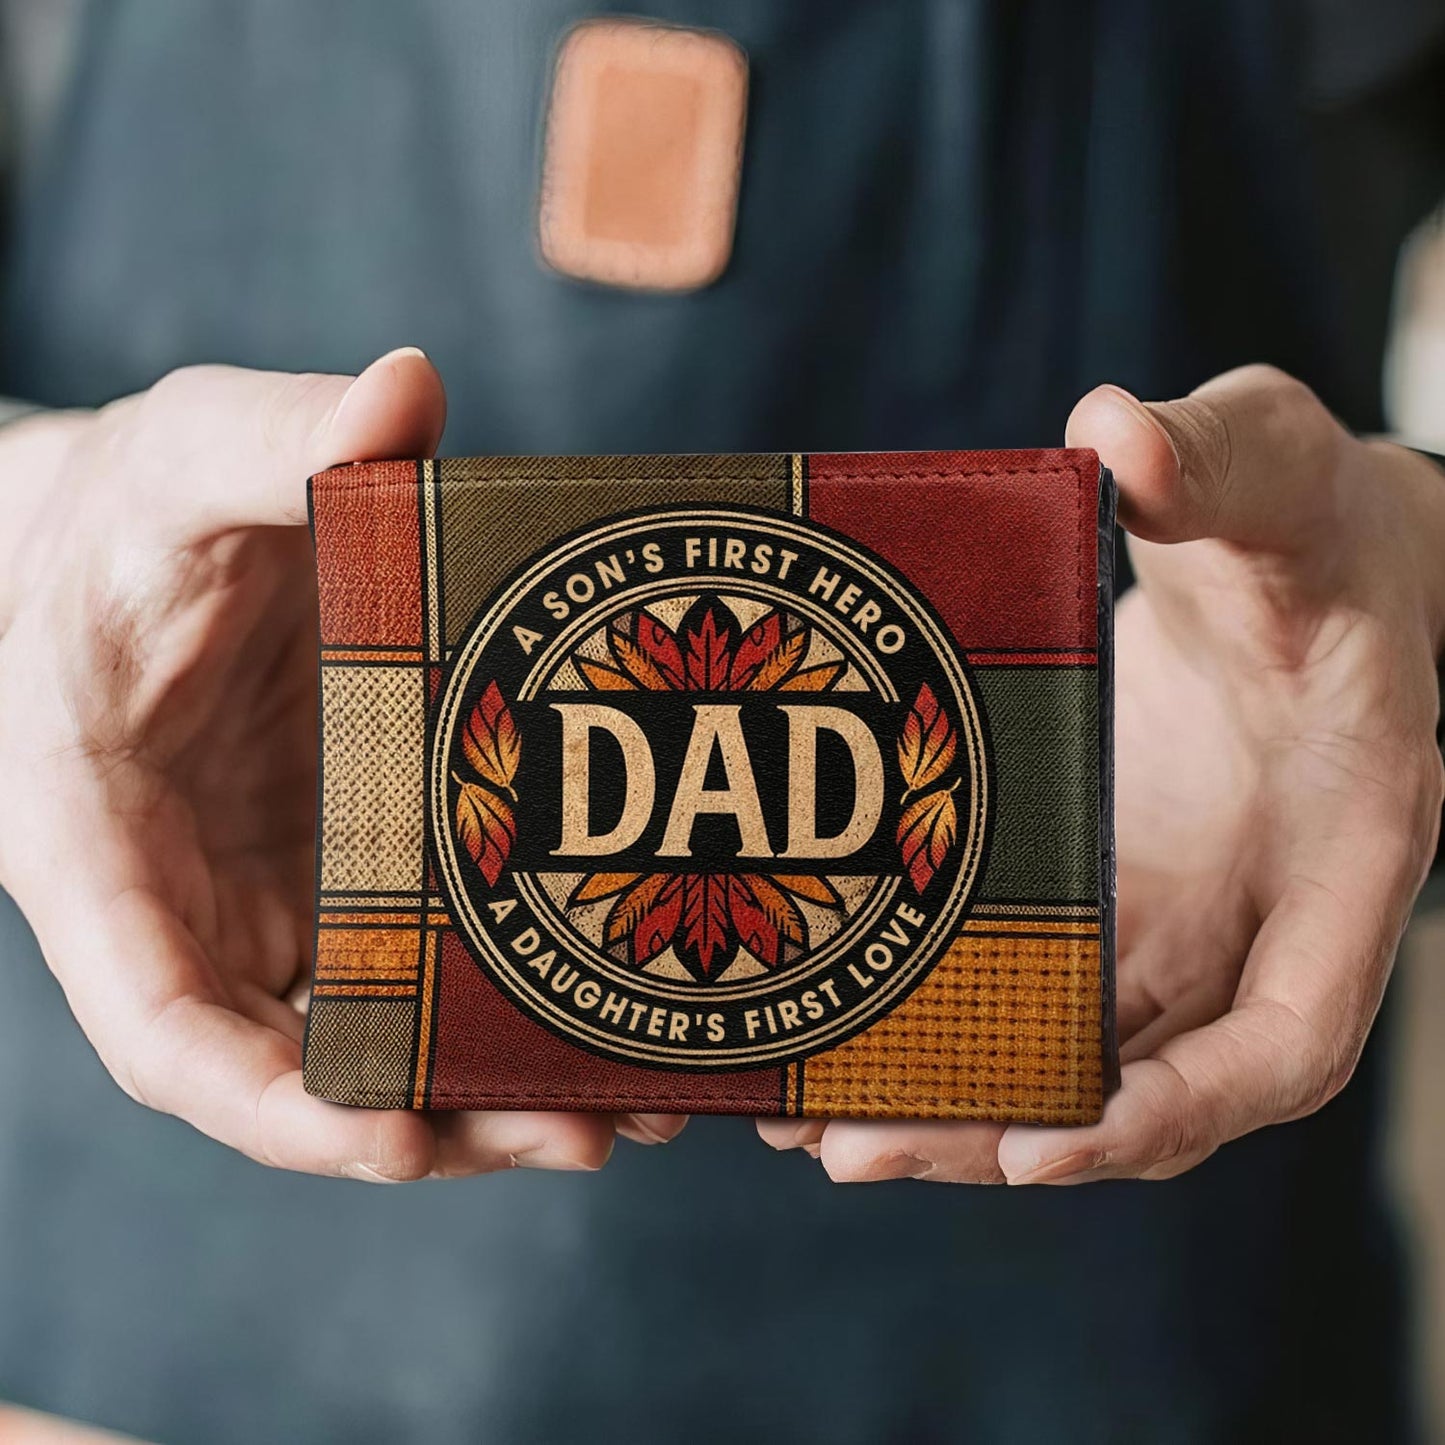 Dad, A Son's First Hero, A Daughter's First Love - Men's Leather Wallet - MW10